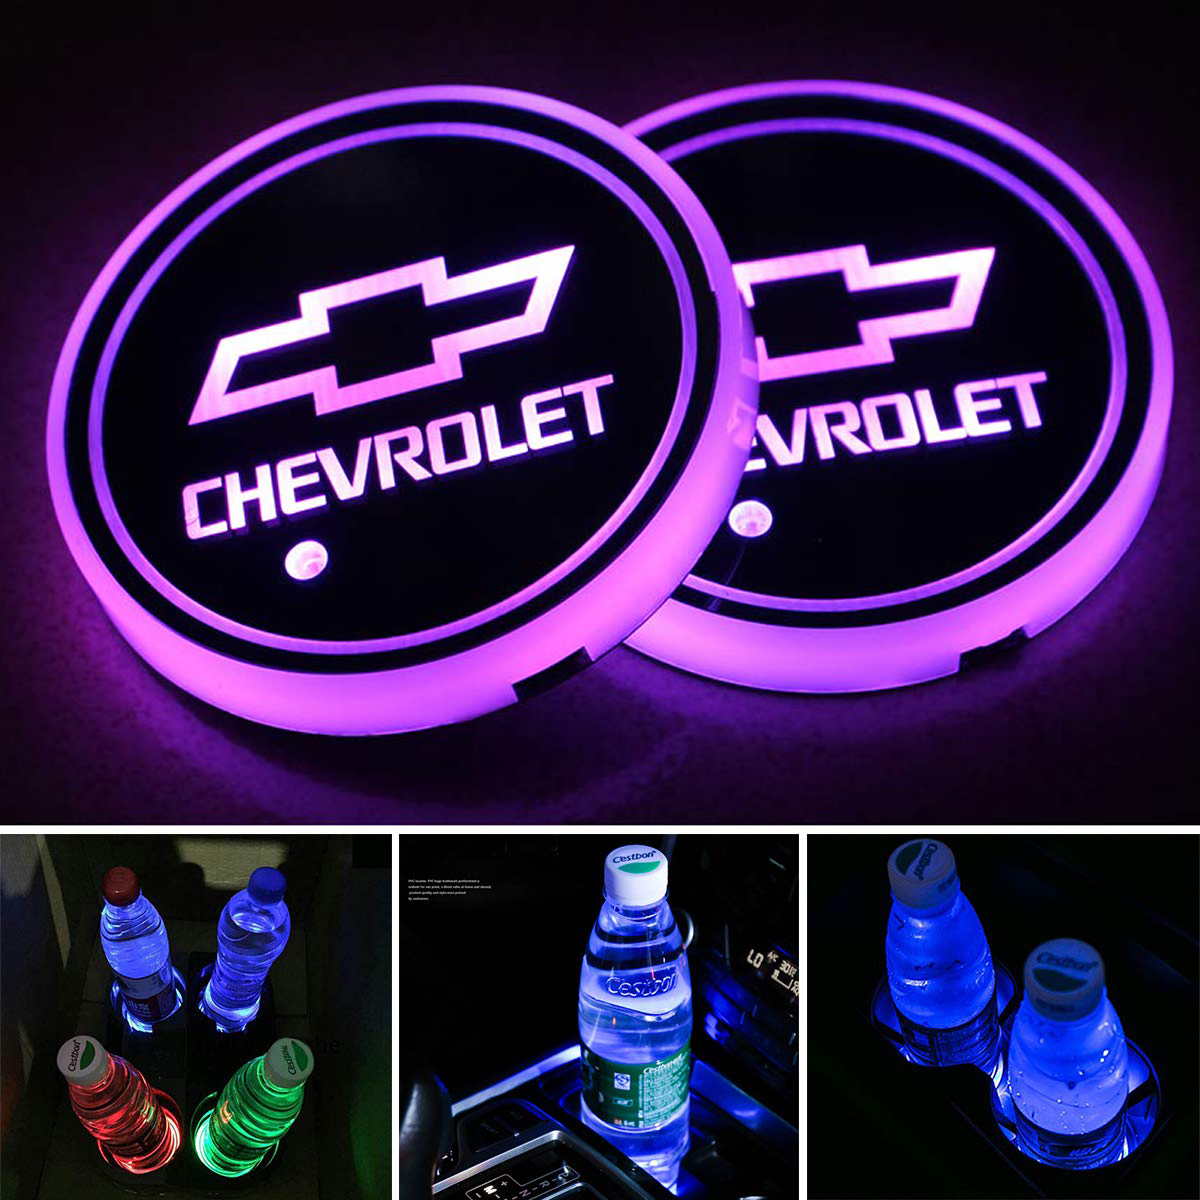 fit Porsche 6 2pcs fit Porsche LED Car Cup Holder Lights,7 Colors Changing USB Charging Mat Luminescent Cup Pad,LED Interior Atmosphere Lamp 